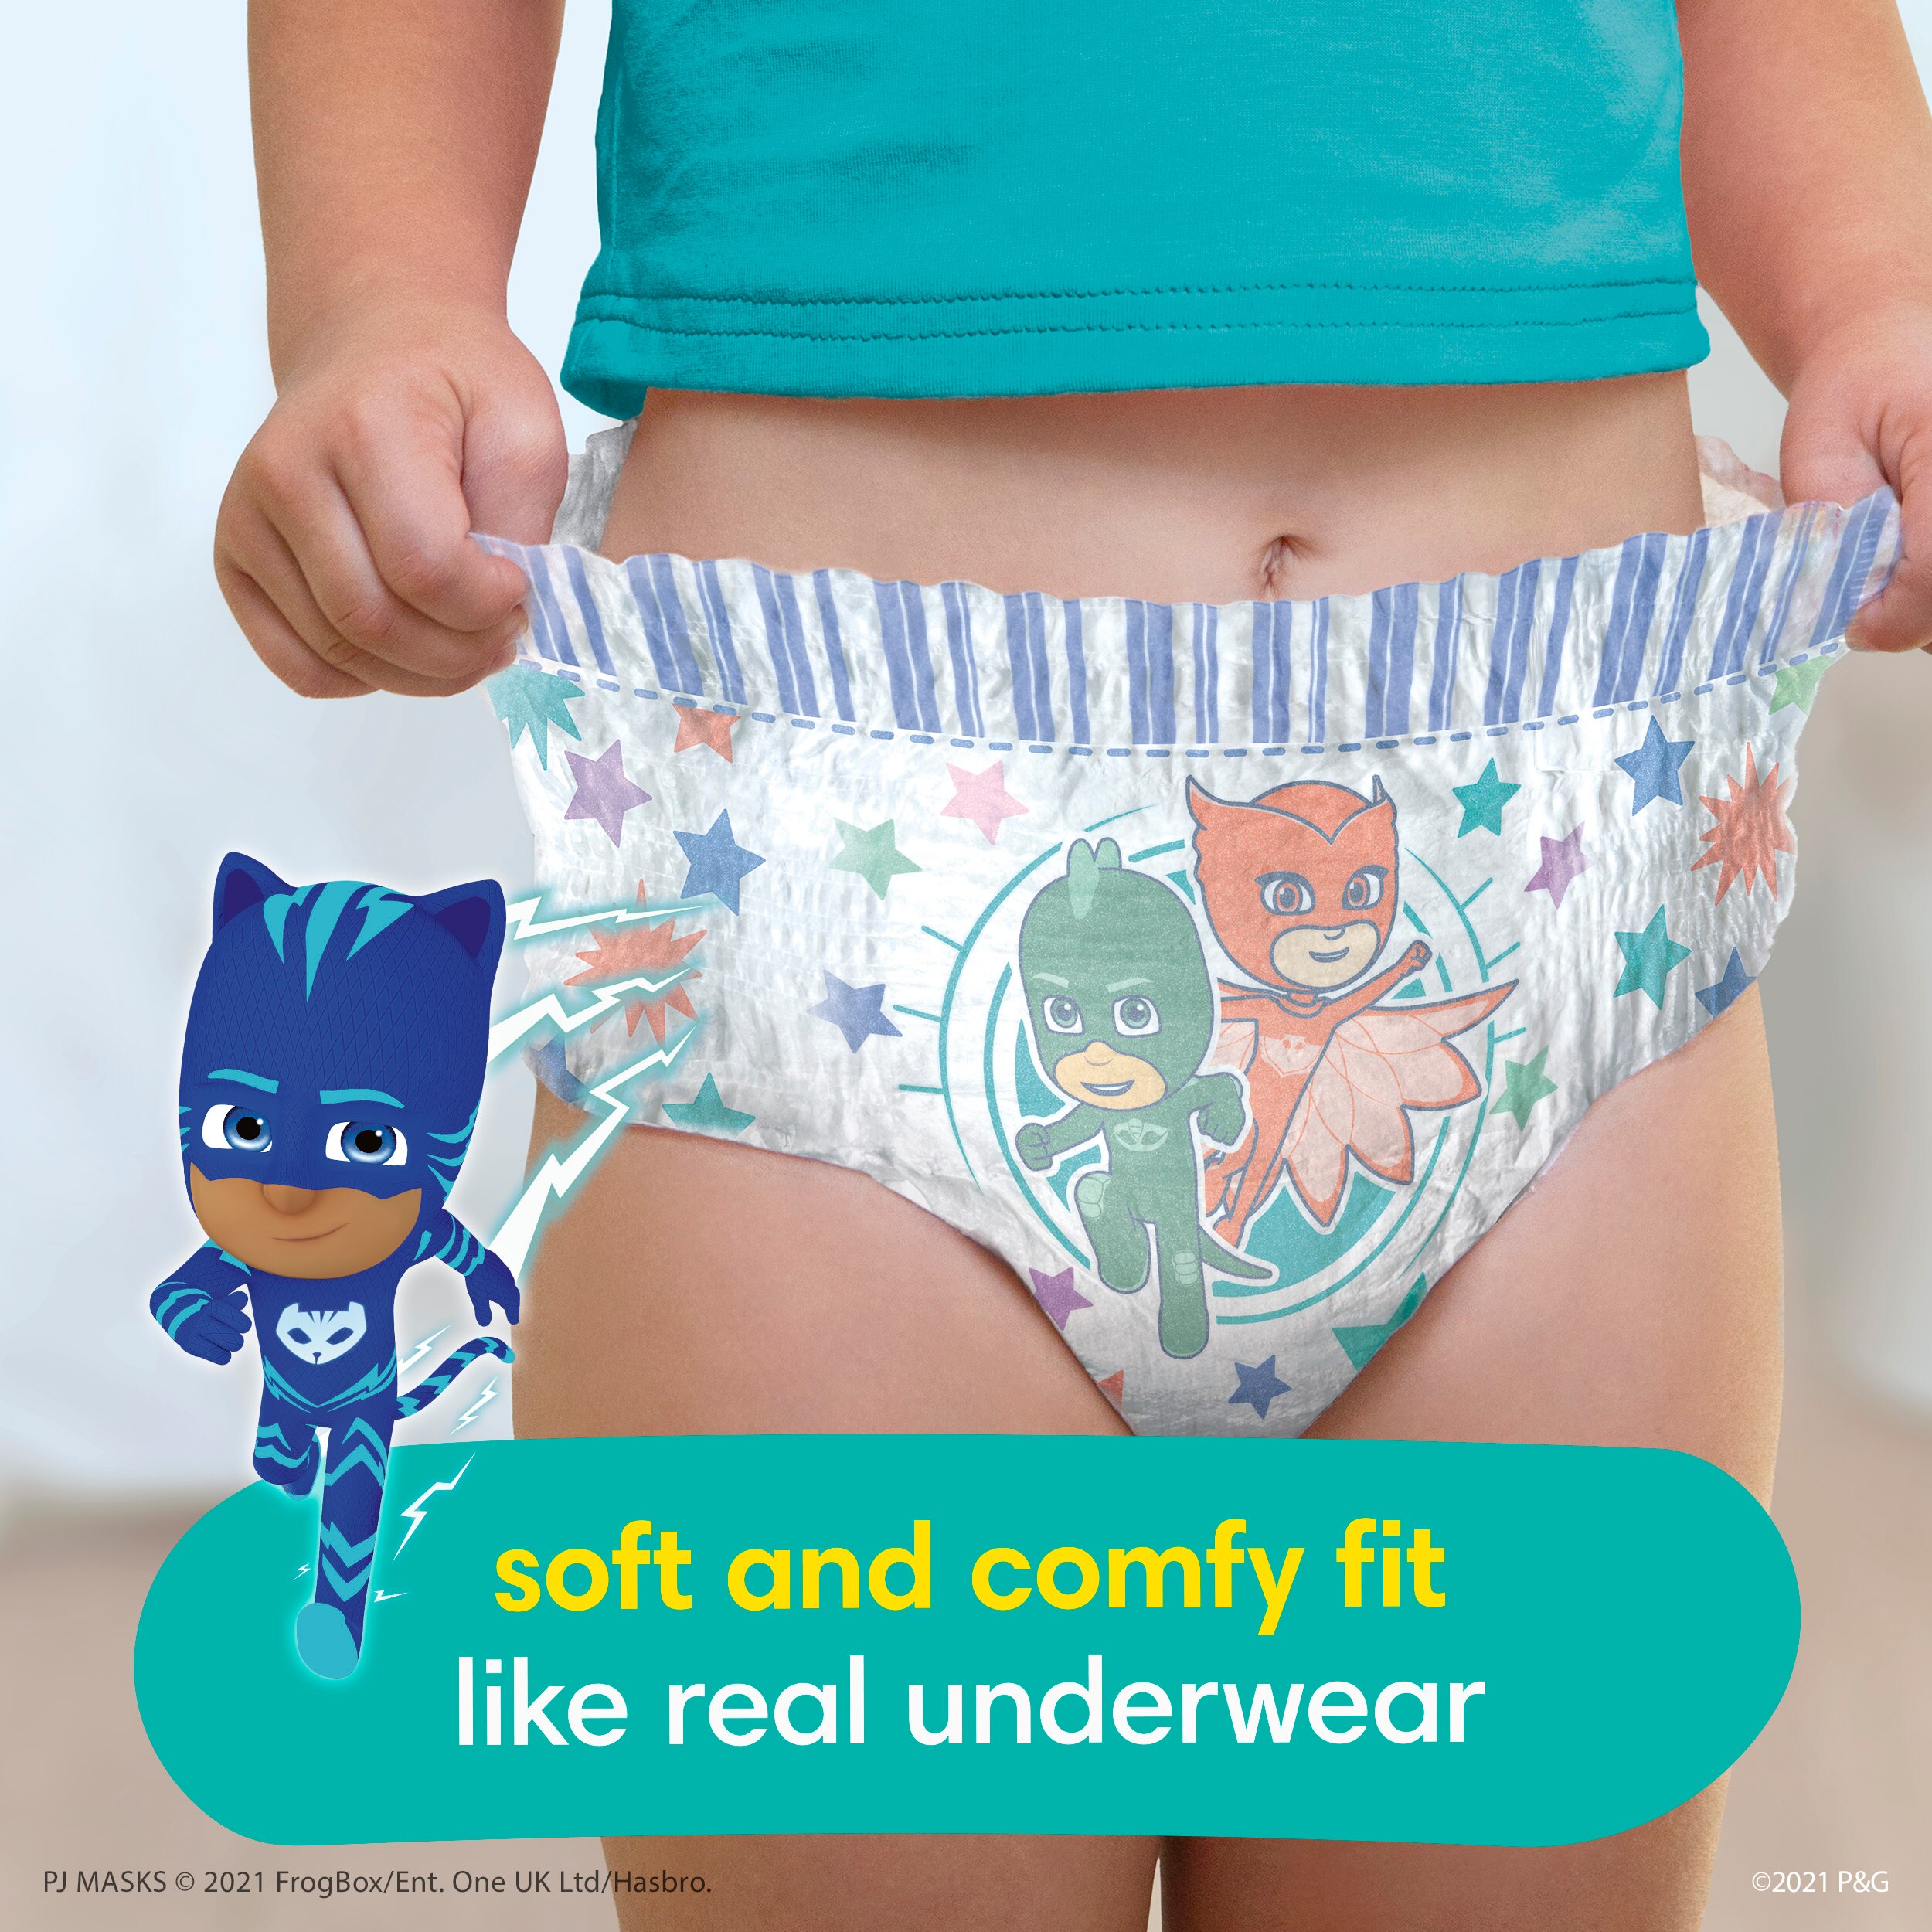 pampers pull up size 4